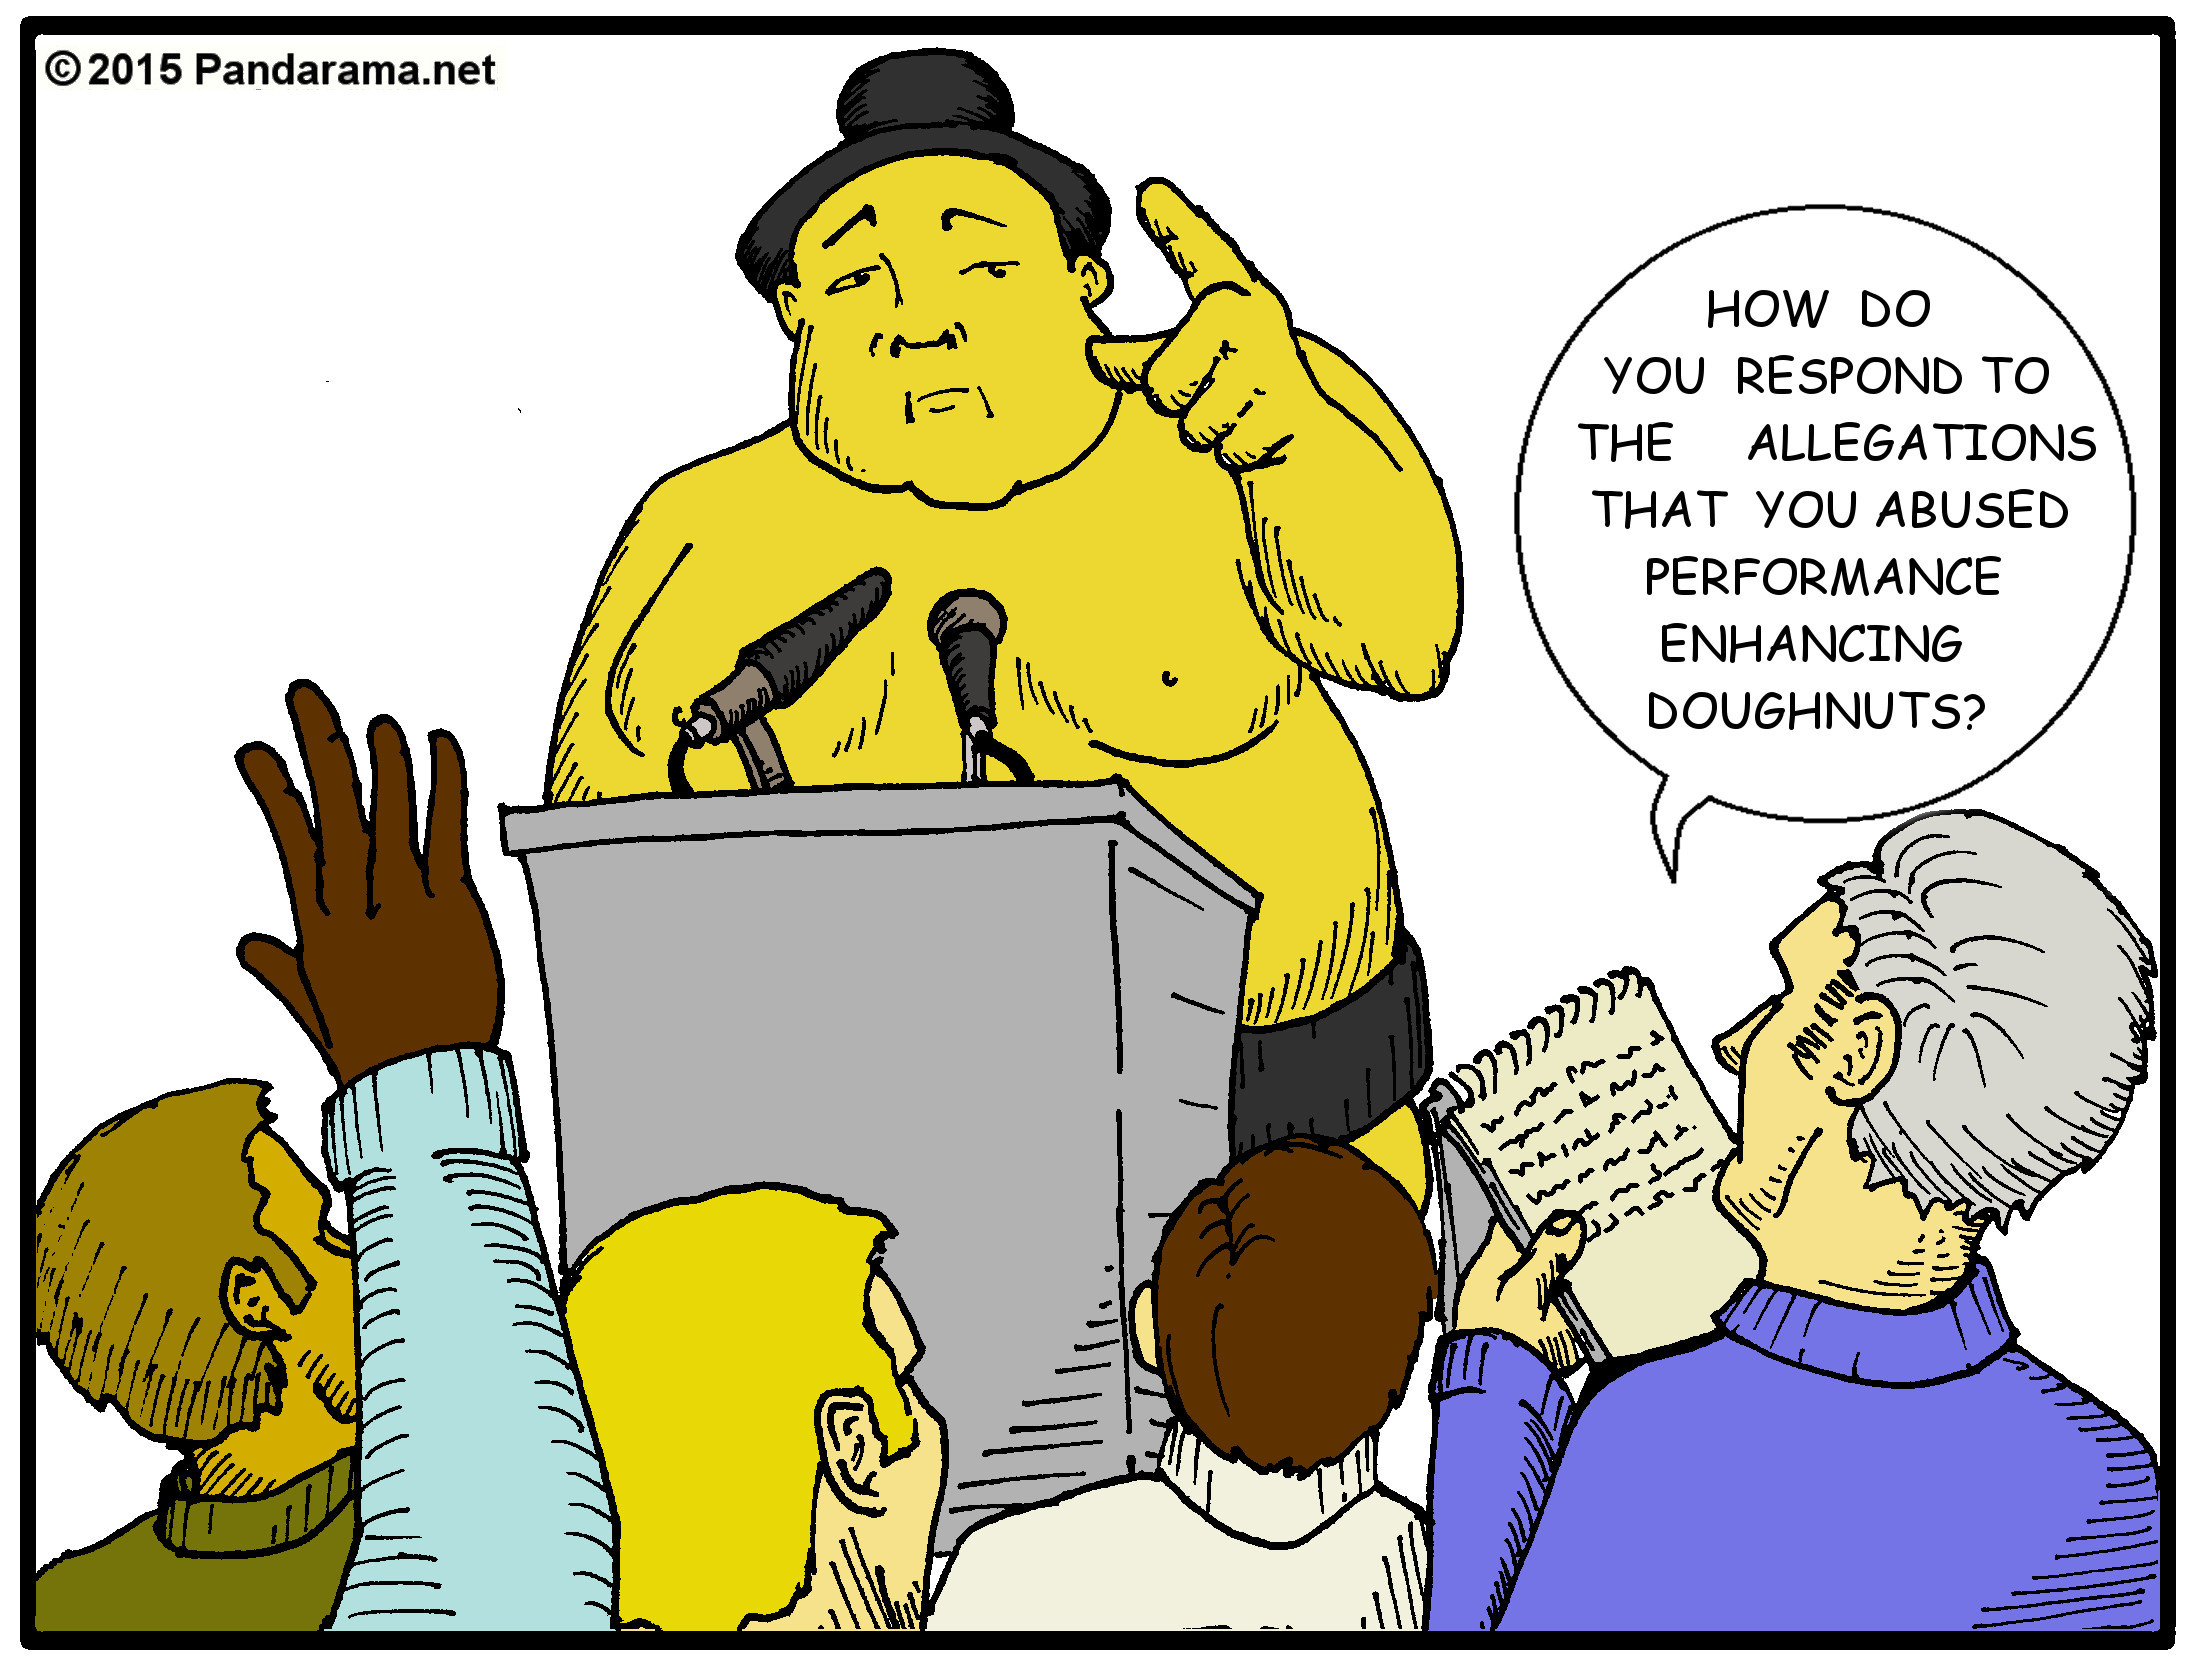 Sumo Wrestler questioned about Performance Enhancing Donuts, by Pandarama.